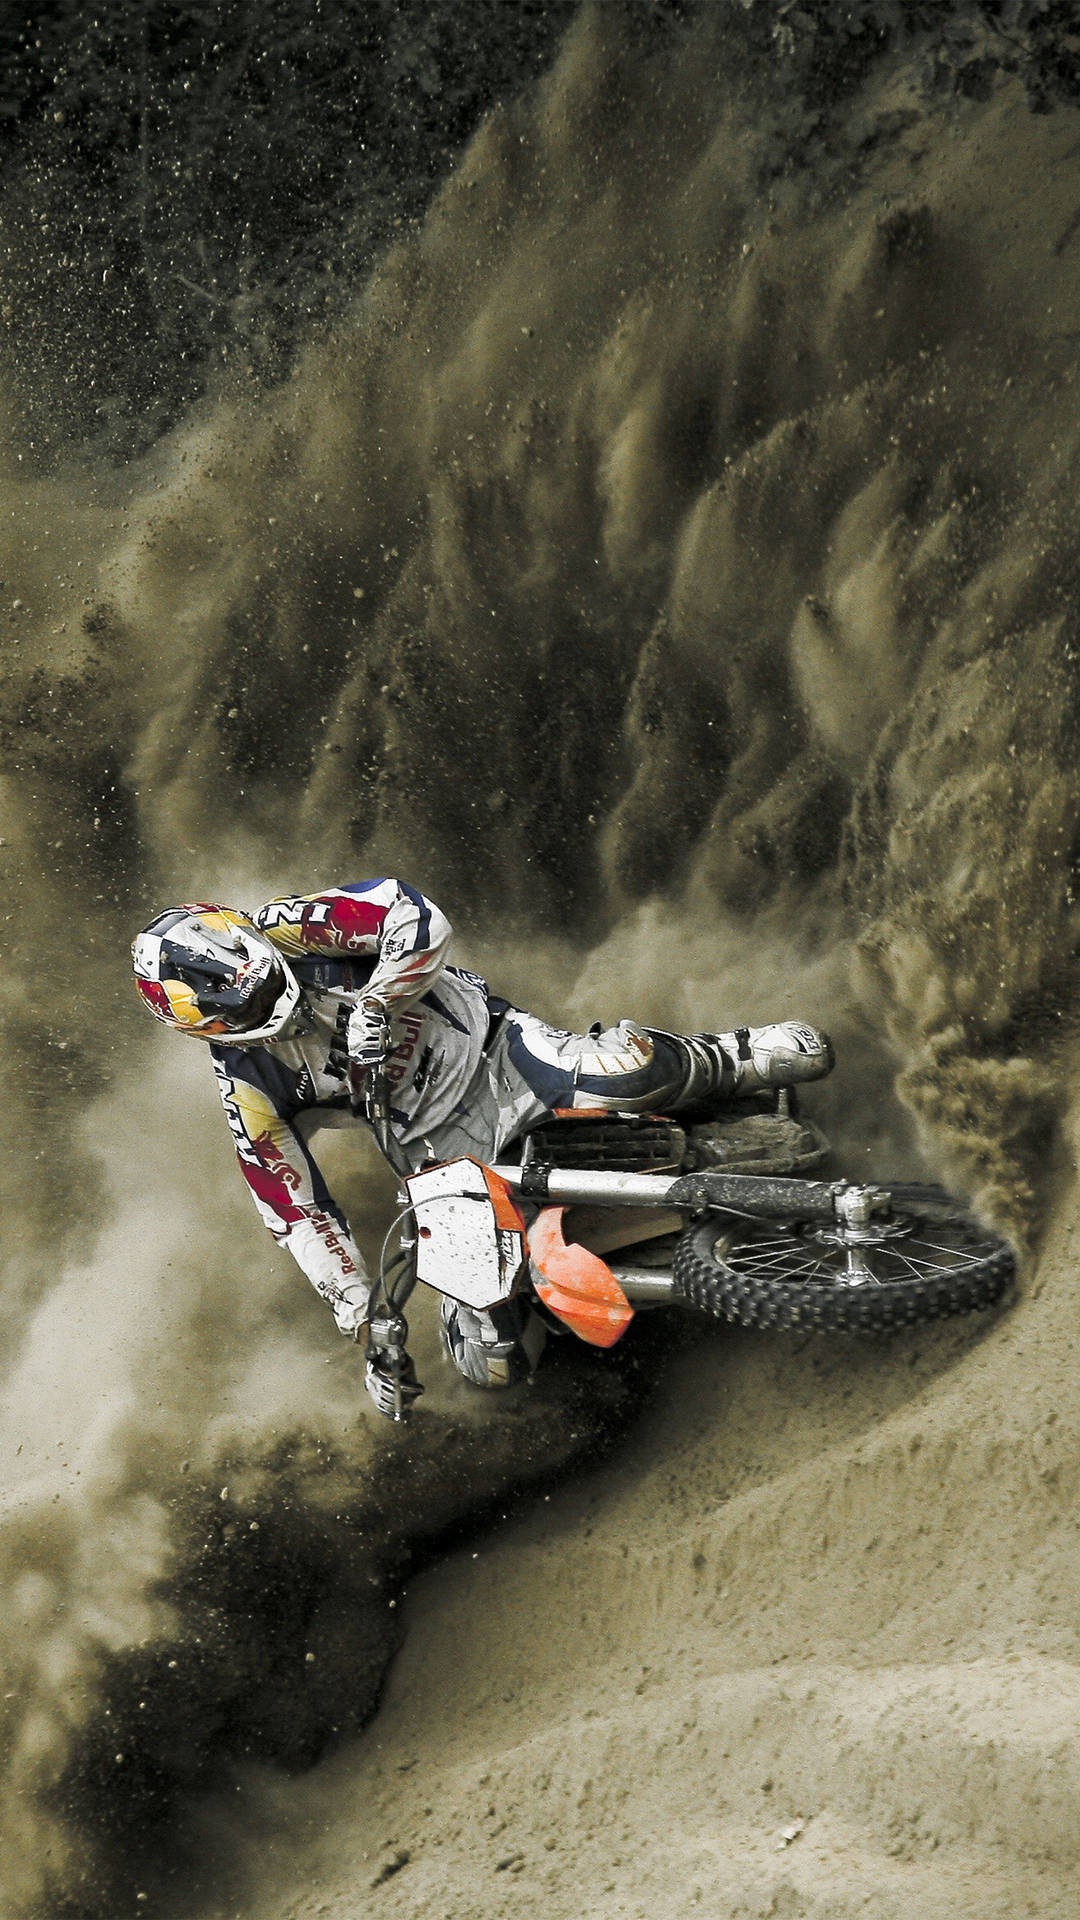 Driving On Sand KTM iPhone Wallpaper